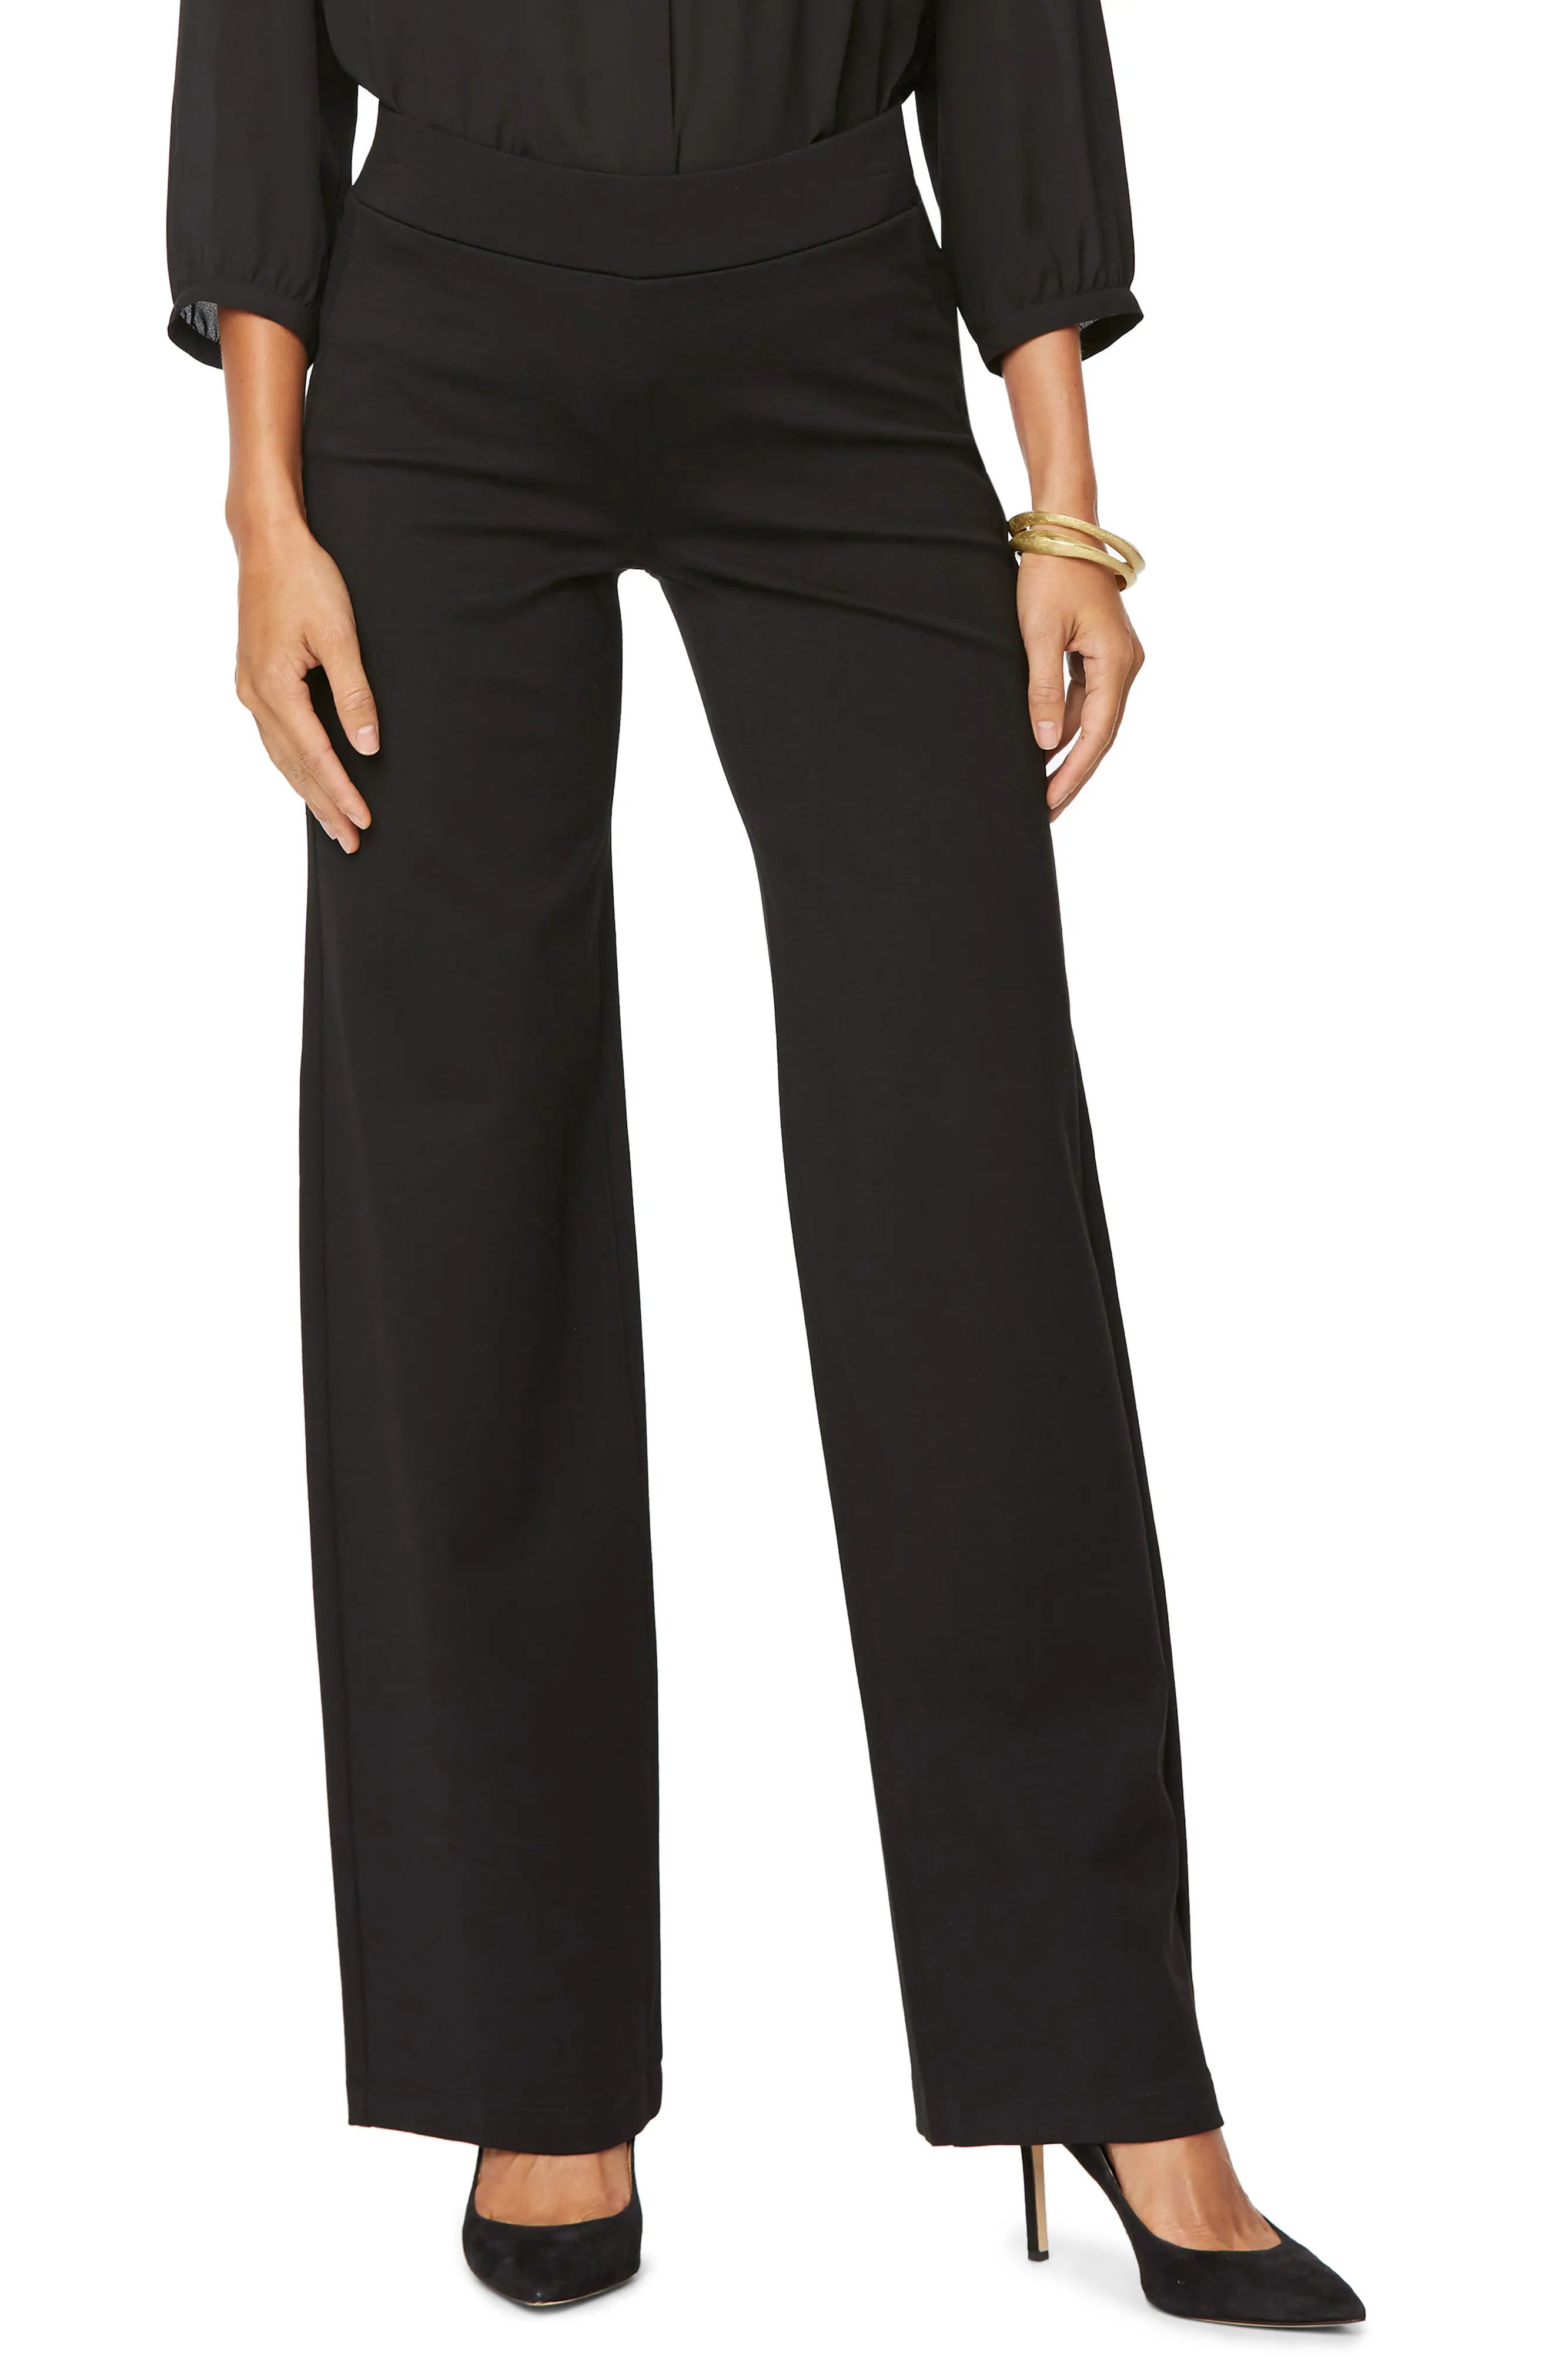 NYDJ Straight Leg Pull-On Pants in Black at Nordstrom, Size 2 | Nordstrom